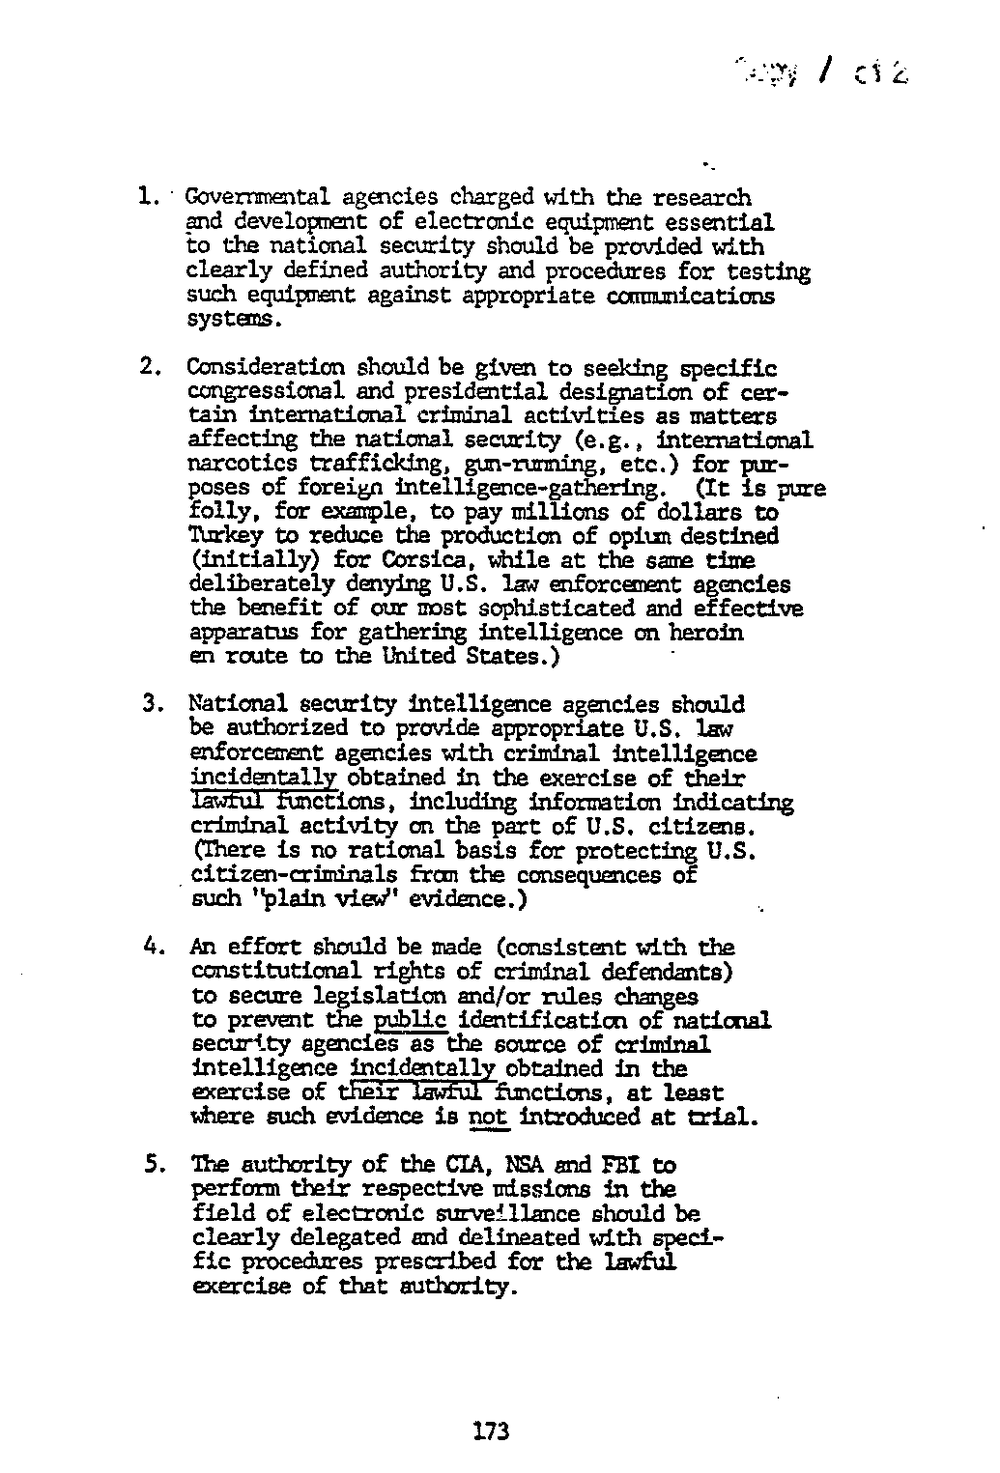 Page 181 from Report on Inquiry Into CIA Related Electronic Surveillance Activities